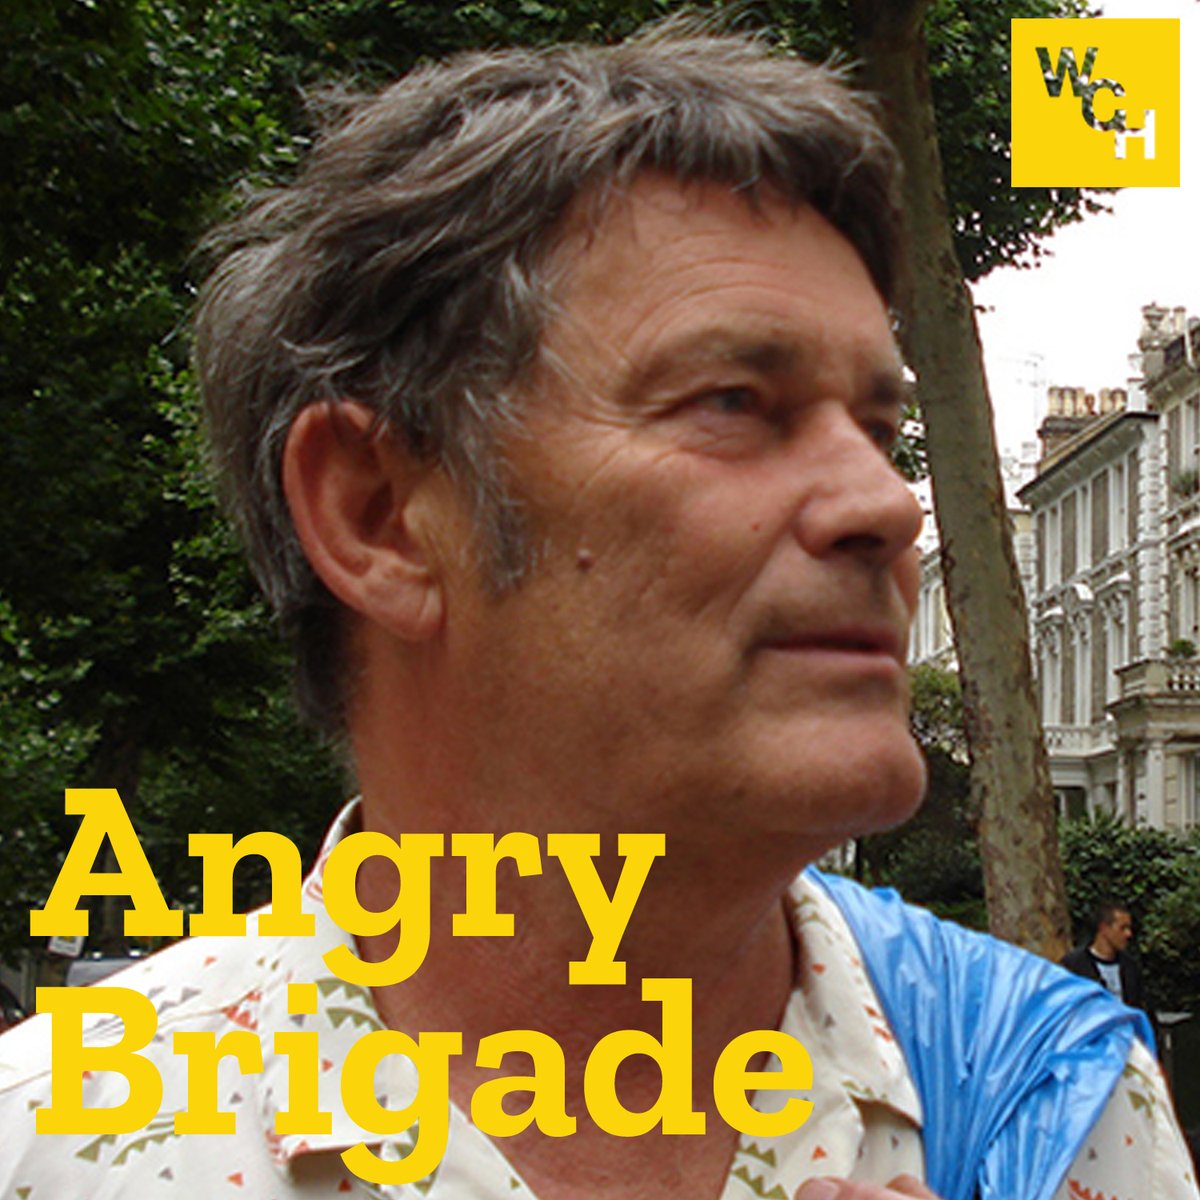 New bonus podcast ep with John Barker, as part of our series on the Angry Brigade Britain's first homegrown urban guerrilla group. This part is about his prison activism, escape attempt, and winter of discontent. Exclusively for our patreon supporters: patreon.com/posts/e84-1-an…